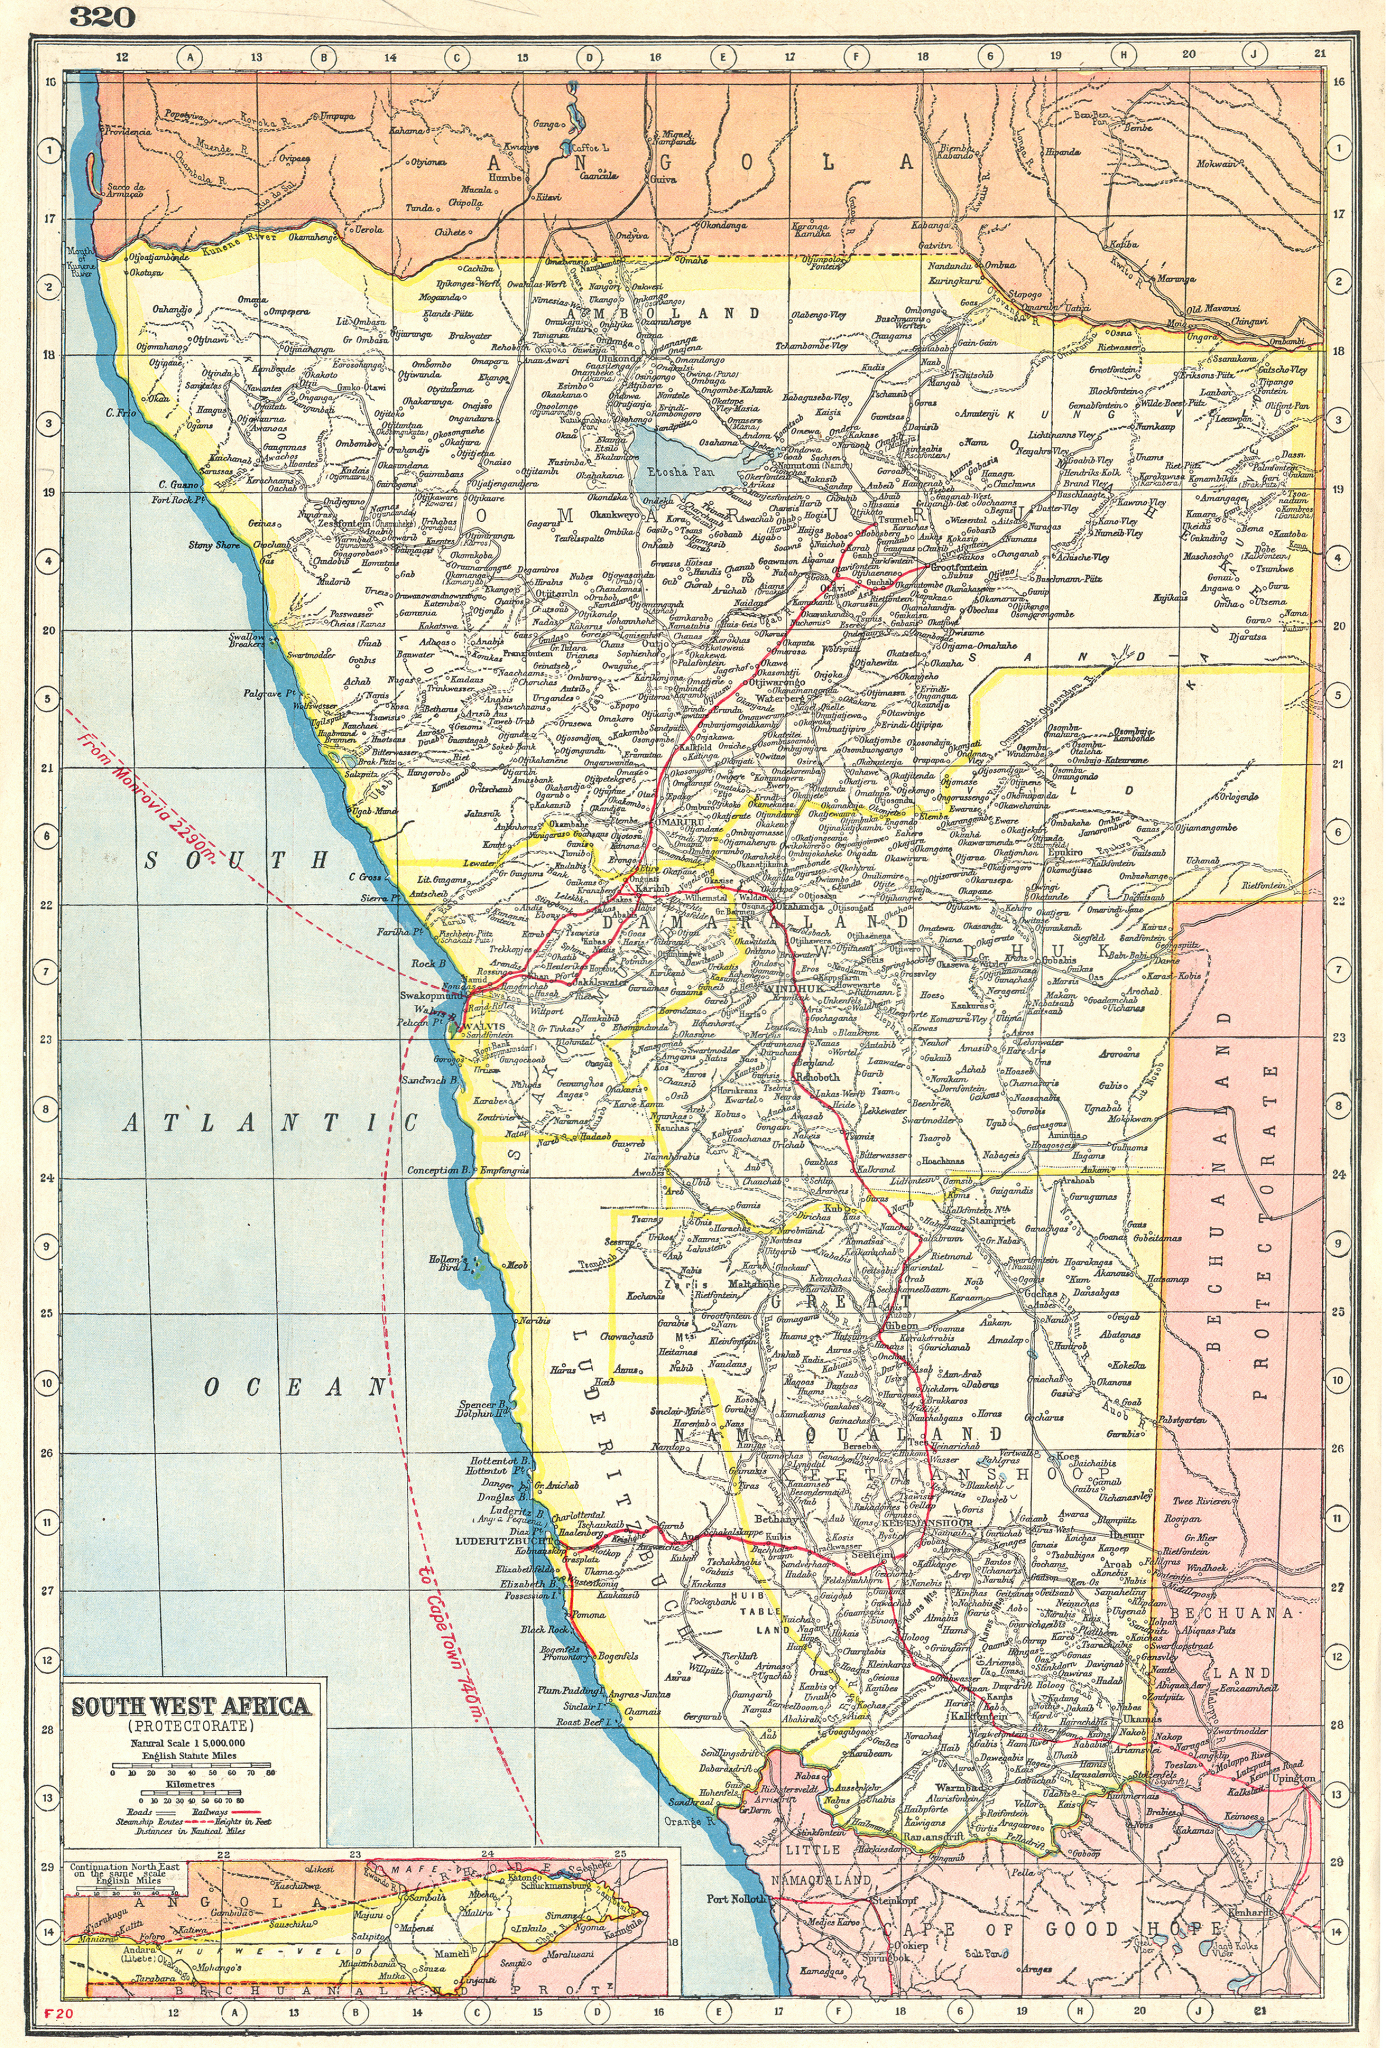 Associate Product NAMIBIA. South West Africa protectorate. HARMSWORTH 1920 old antique map chart